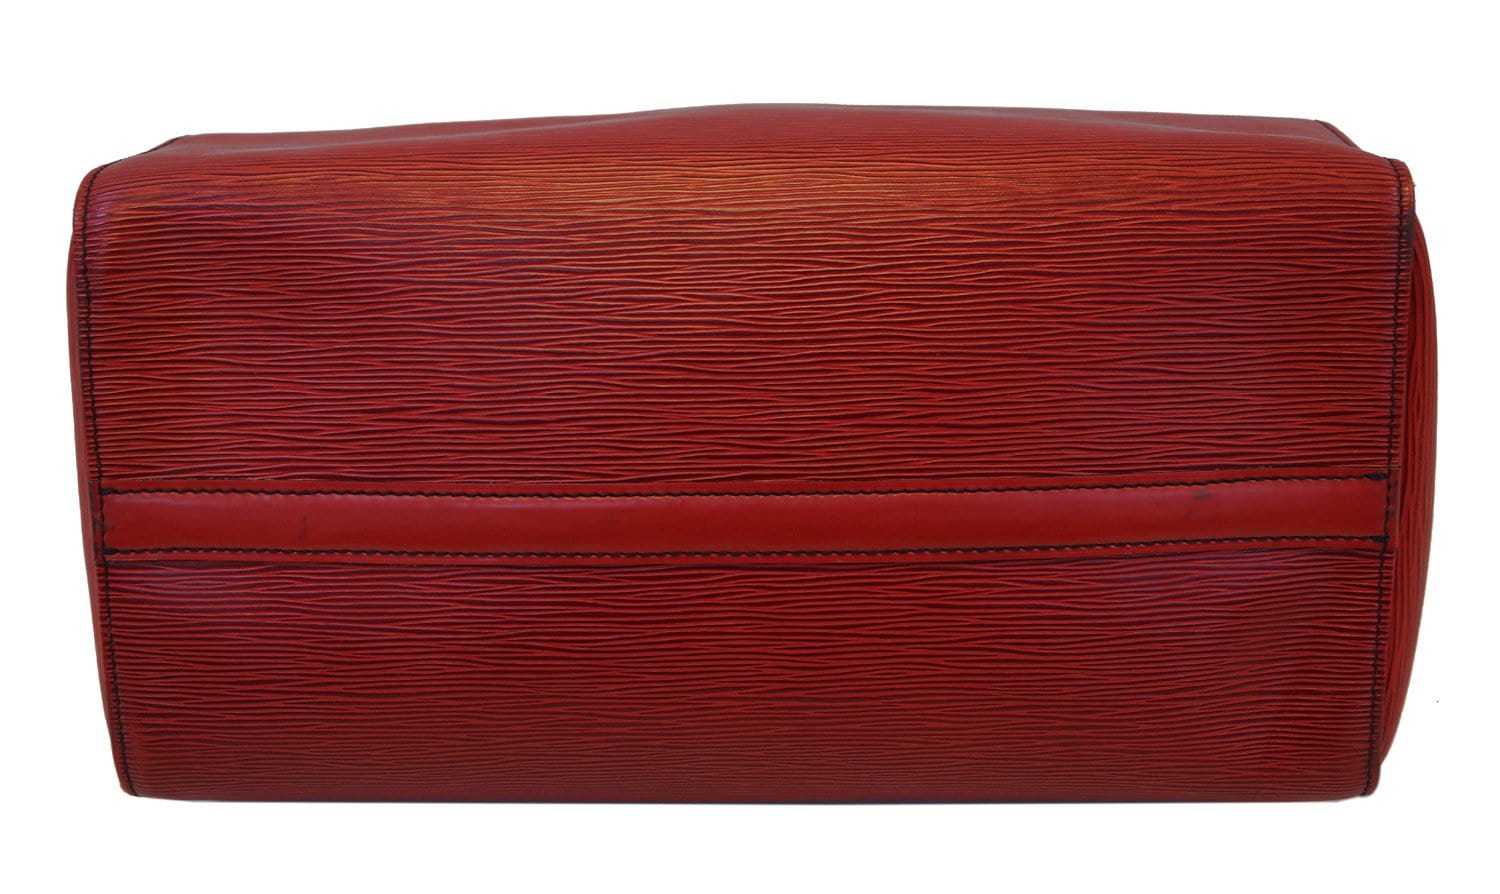 Authentic Louis Vuitton Epi Dauphine Cosmetic Pouch Red M48447 LV 4755G